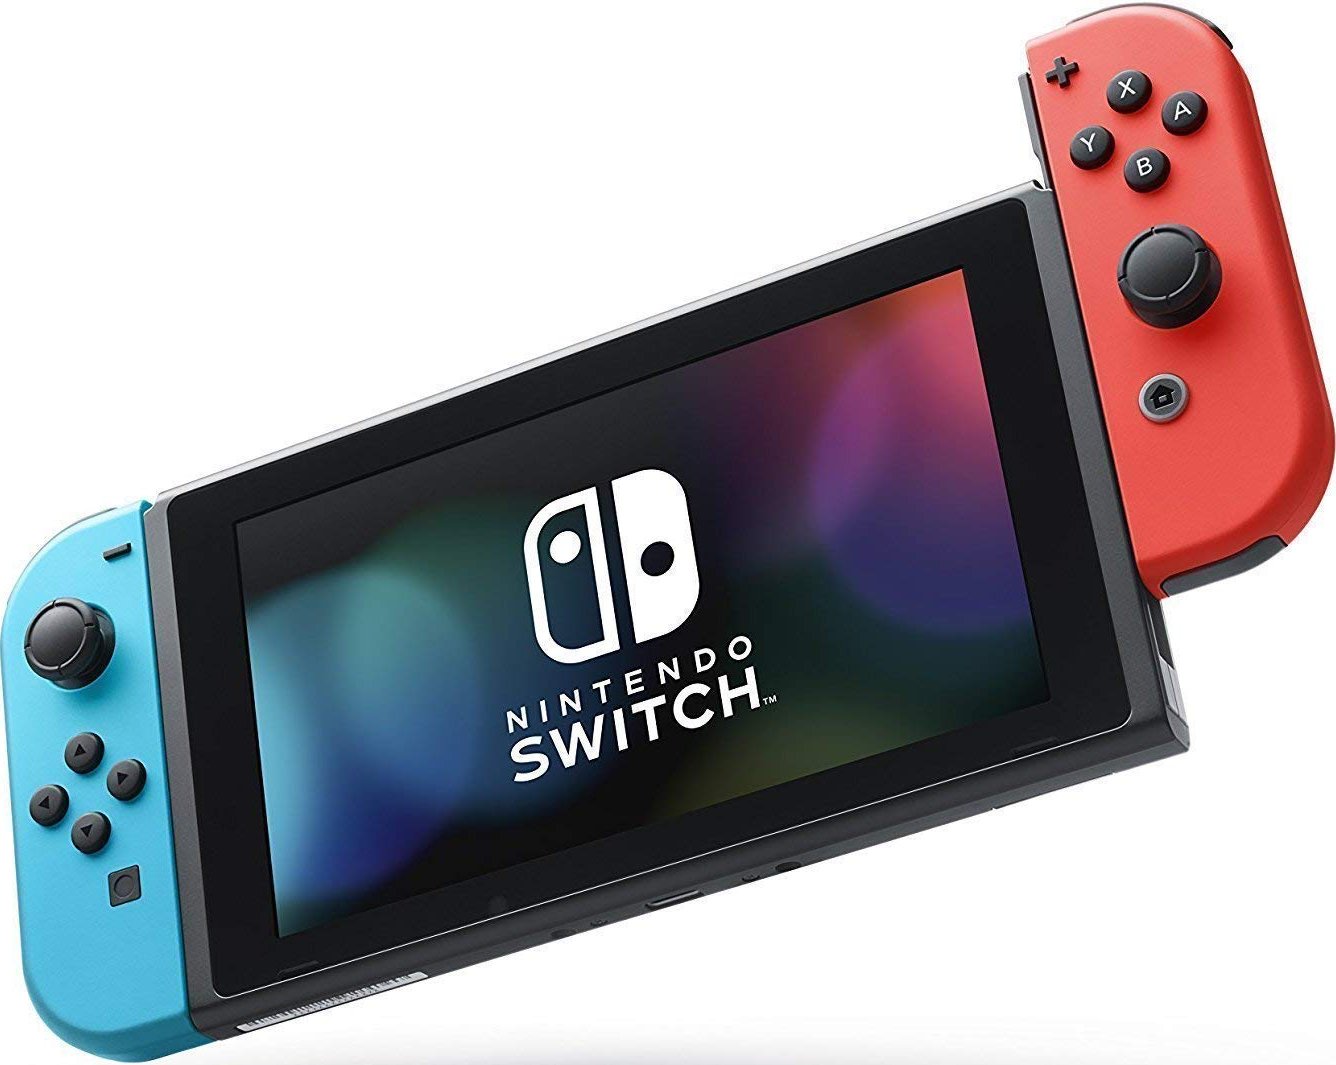 Nintendo Switch Neon Blue and Red Joy-Cons